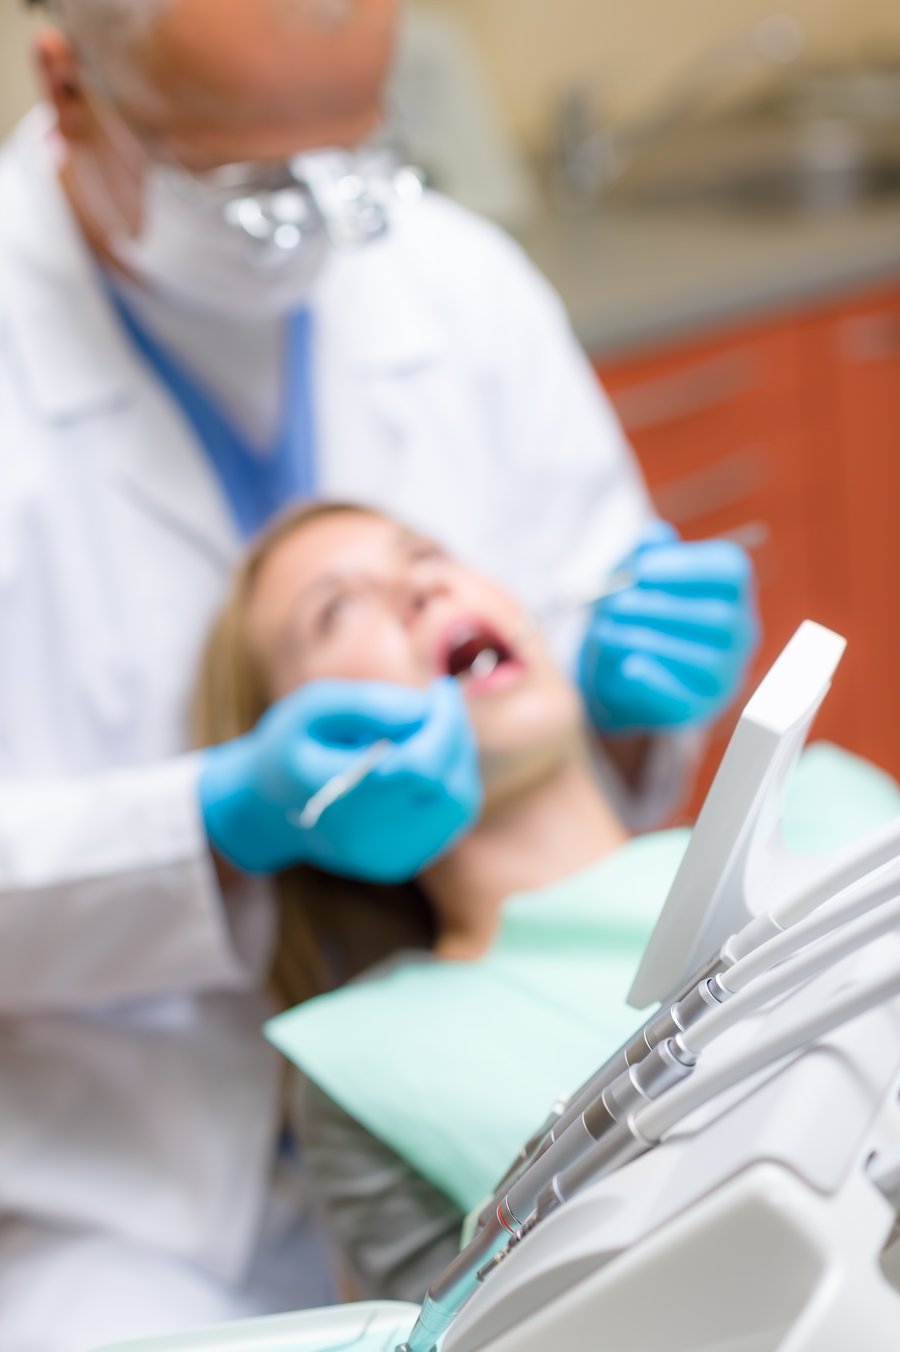 Dental Equipment Finance Rates for Small Business